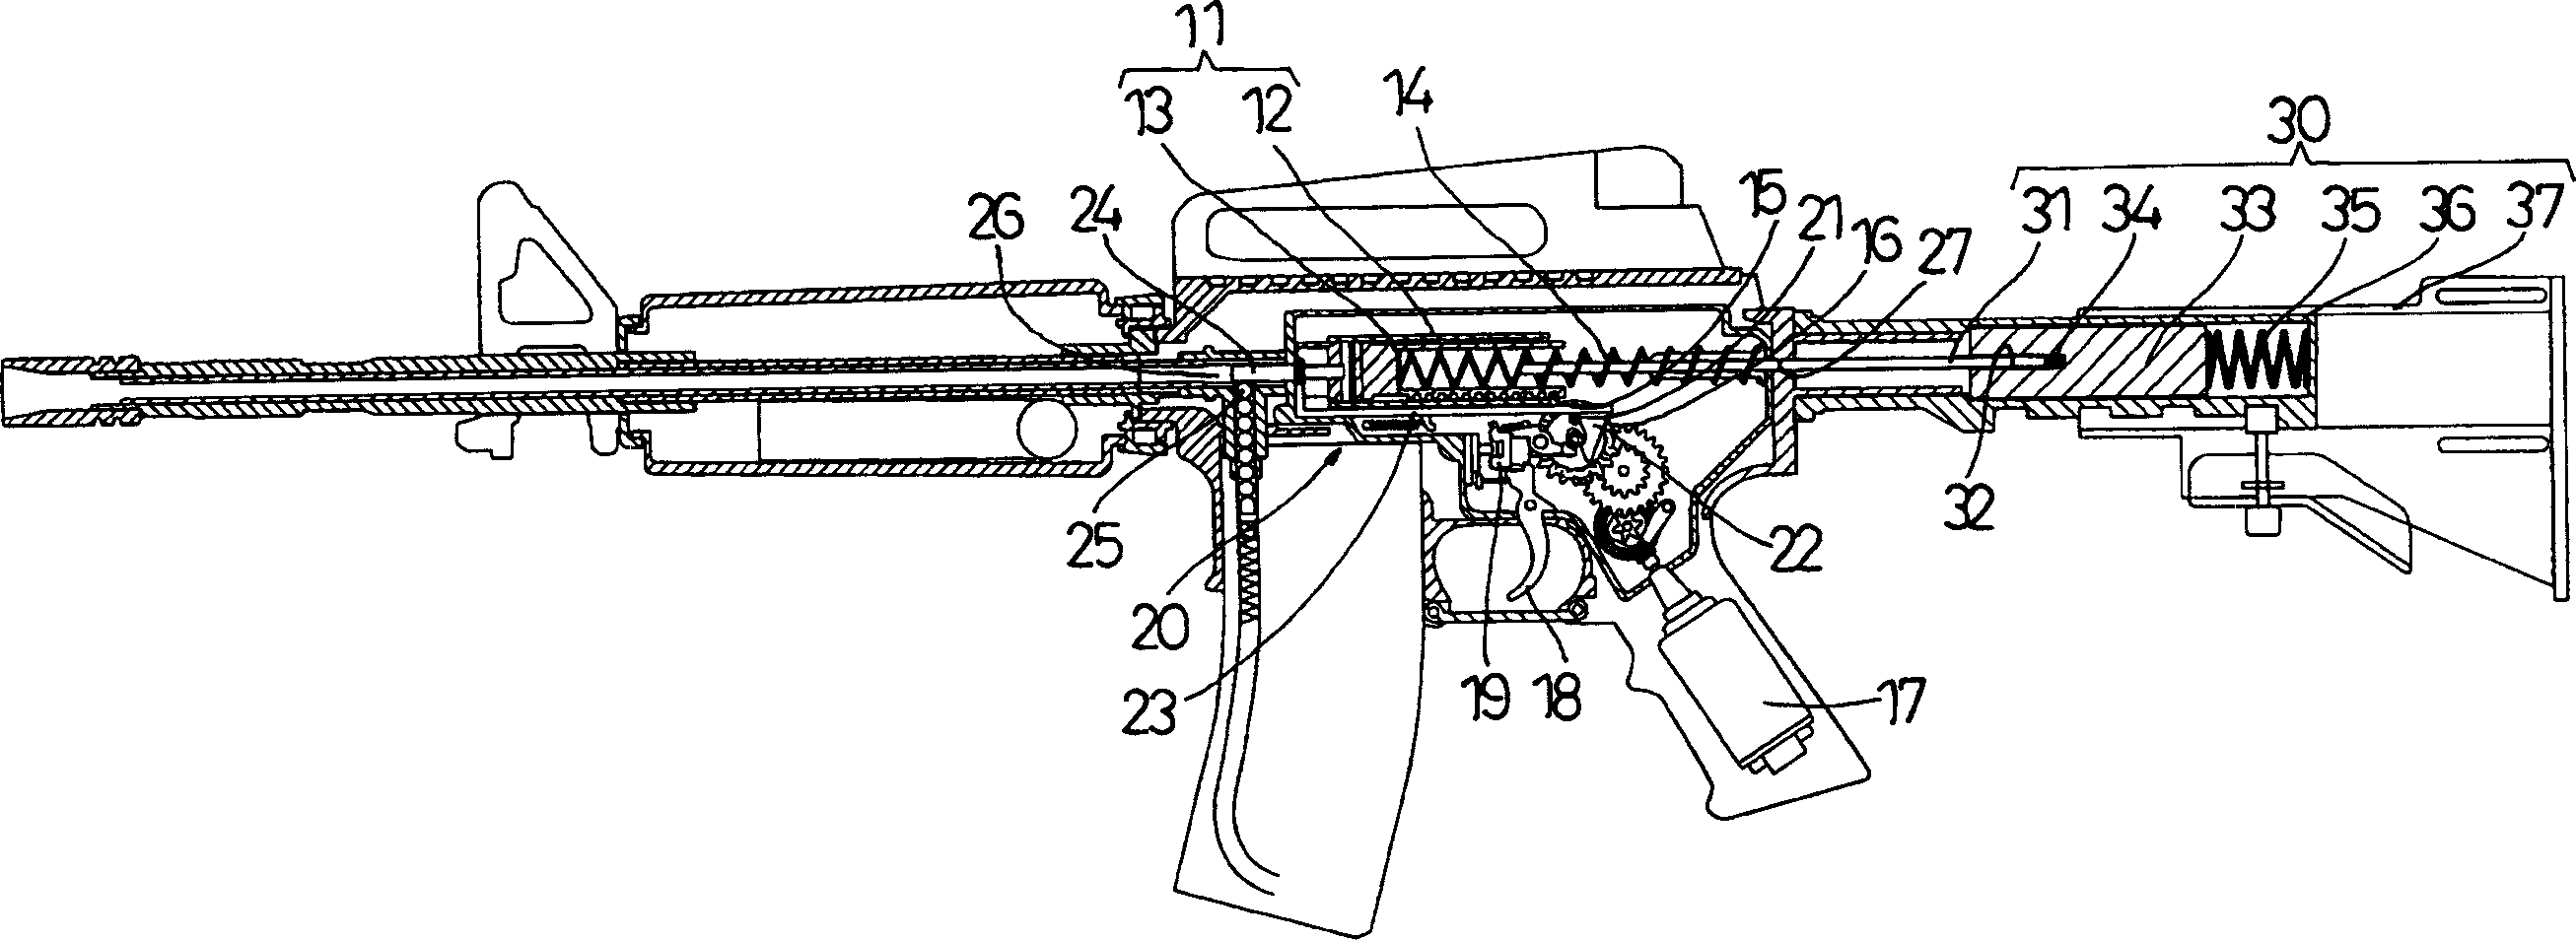 Recoiling device of toy gun